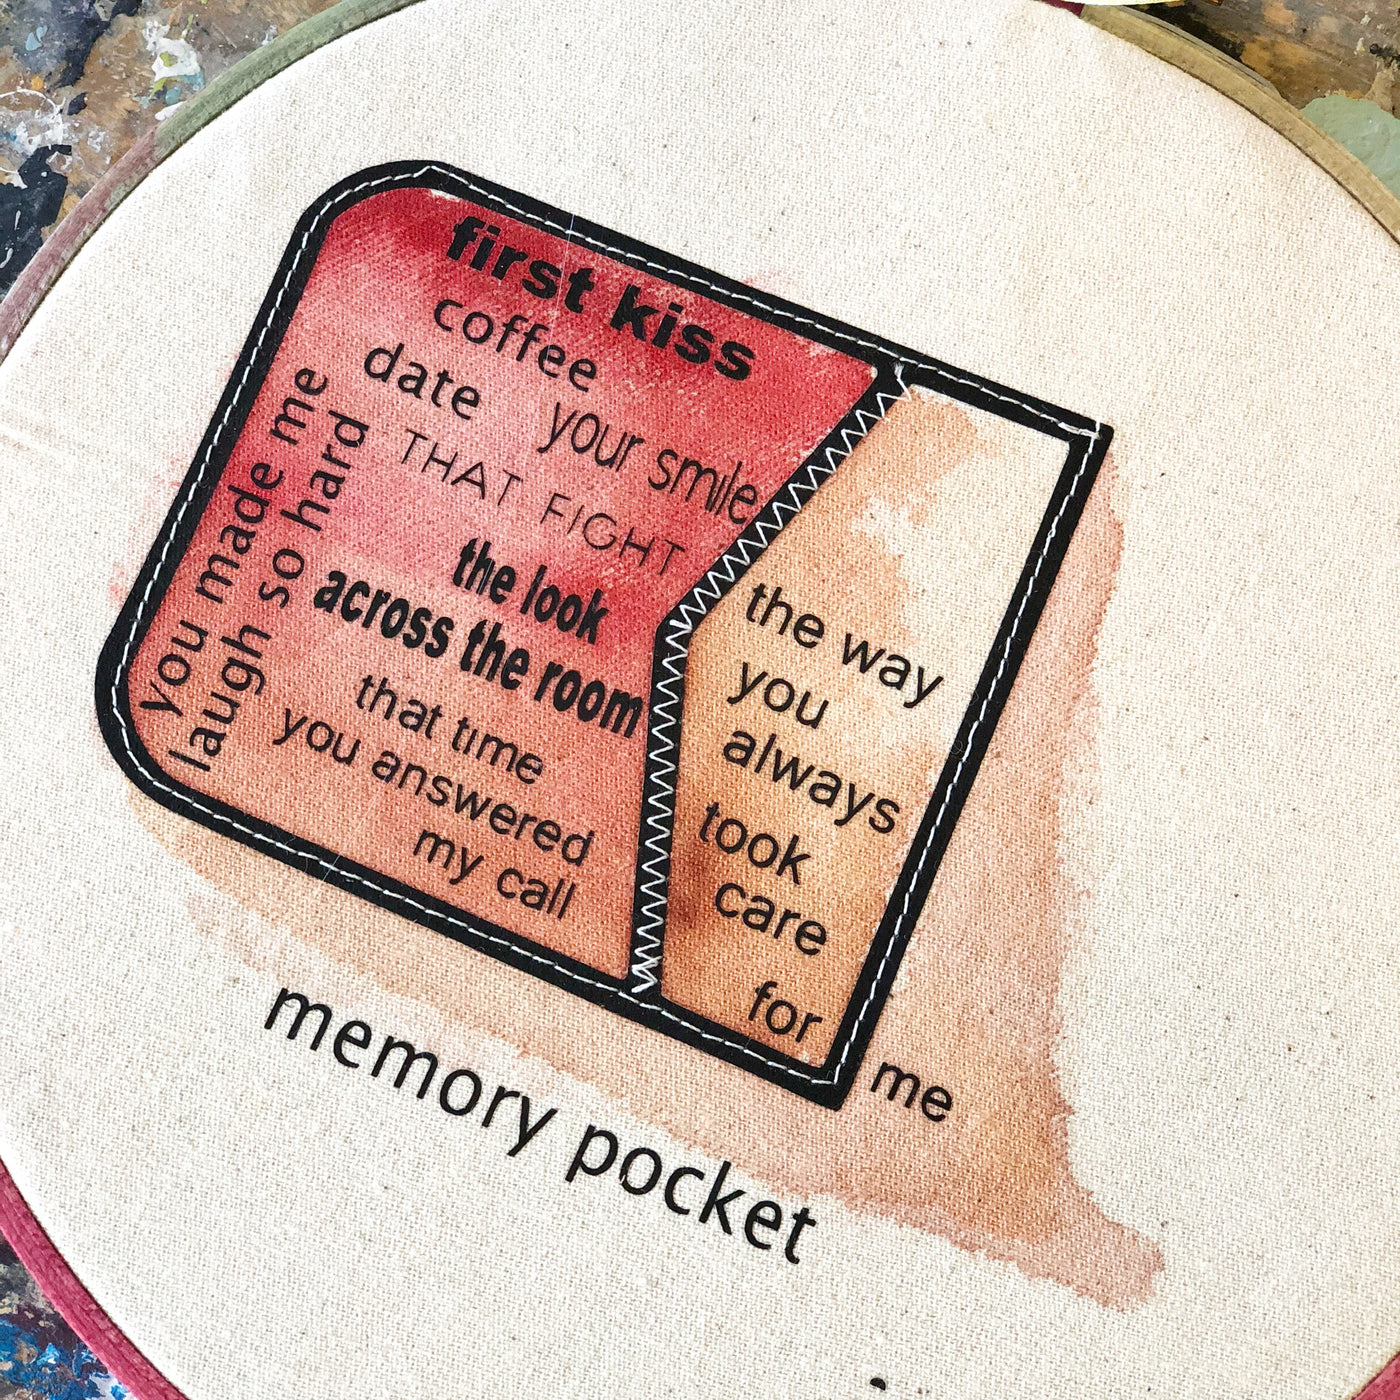 a round wooden painted hoop with canvas, a painted red pocket on its side with the words spilling out...memory pocket, first kiss, coffee date, your smile, the look across the room, that time you answered my call, you always made me laugh so har, the way you always took care for me.